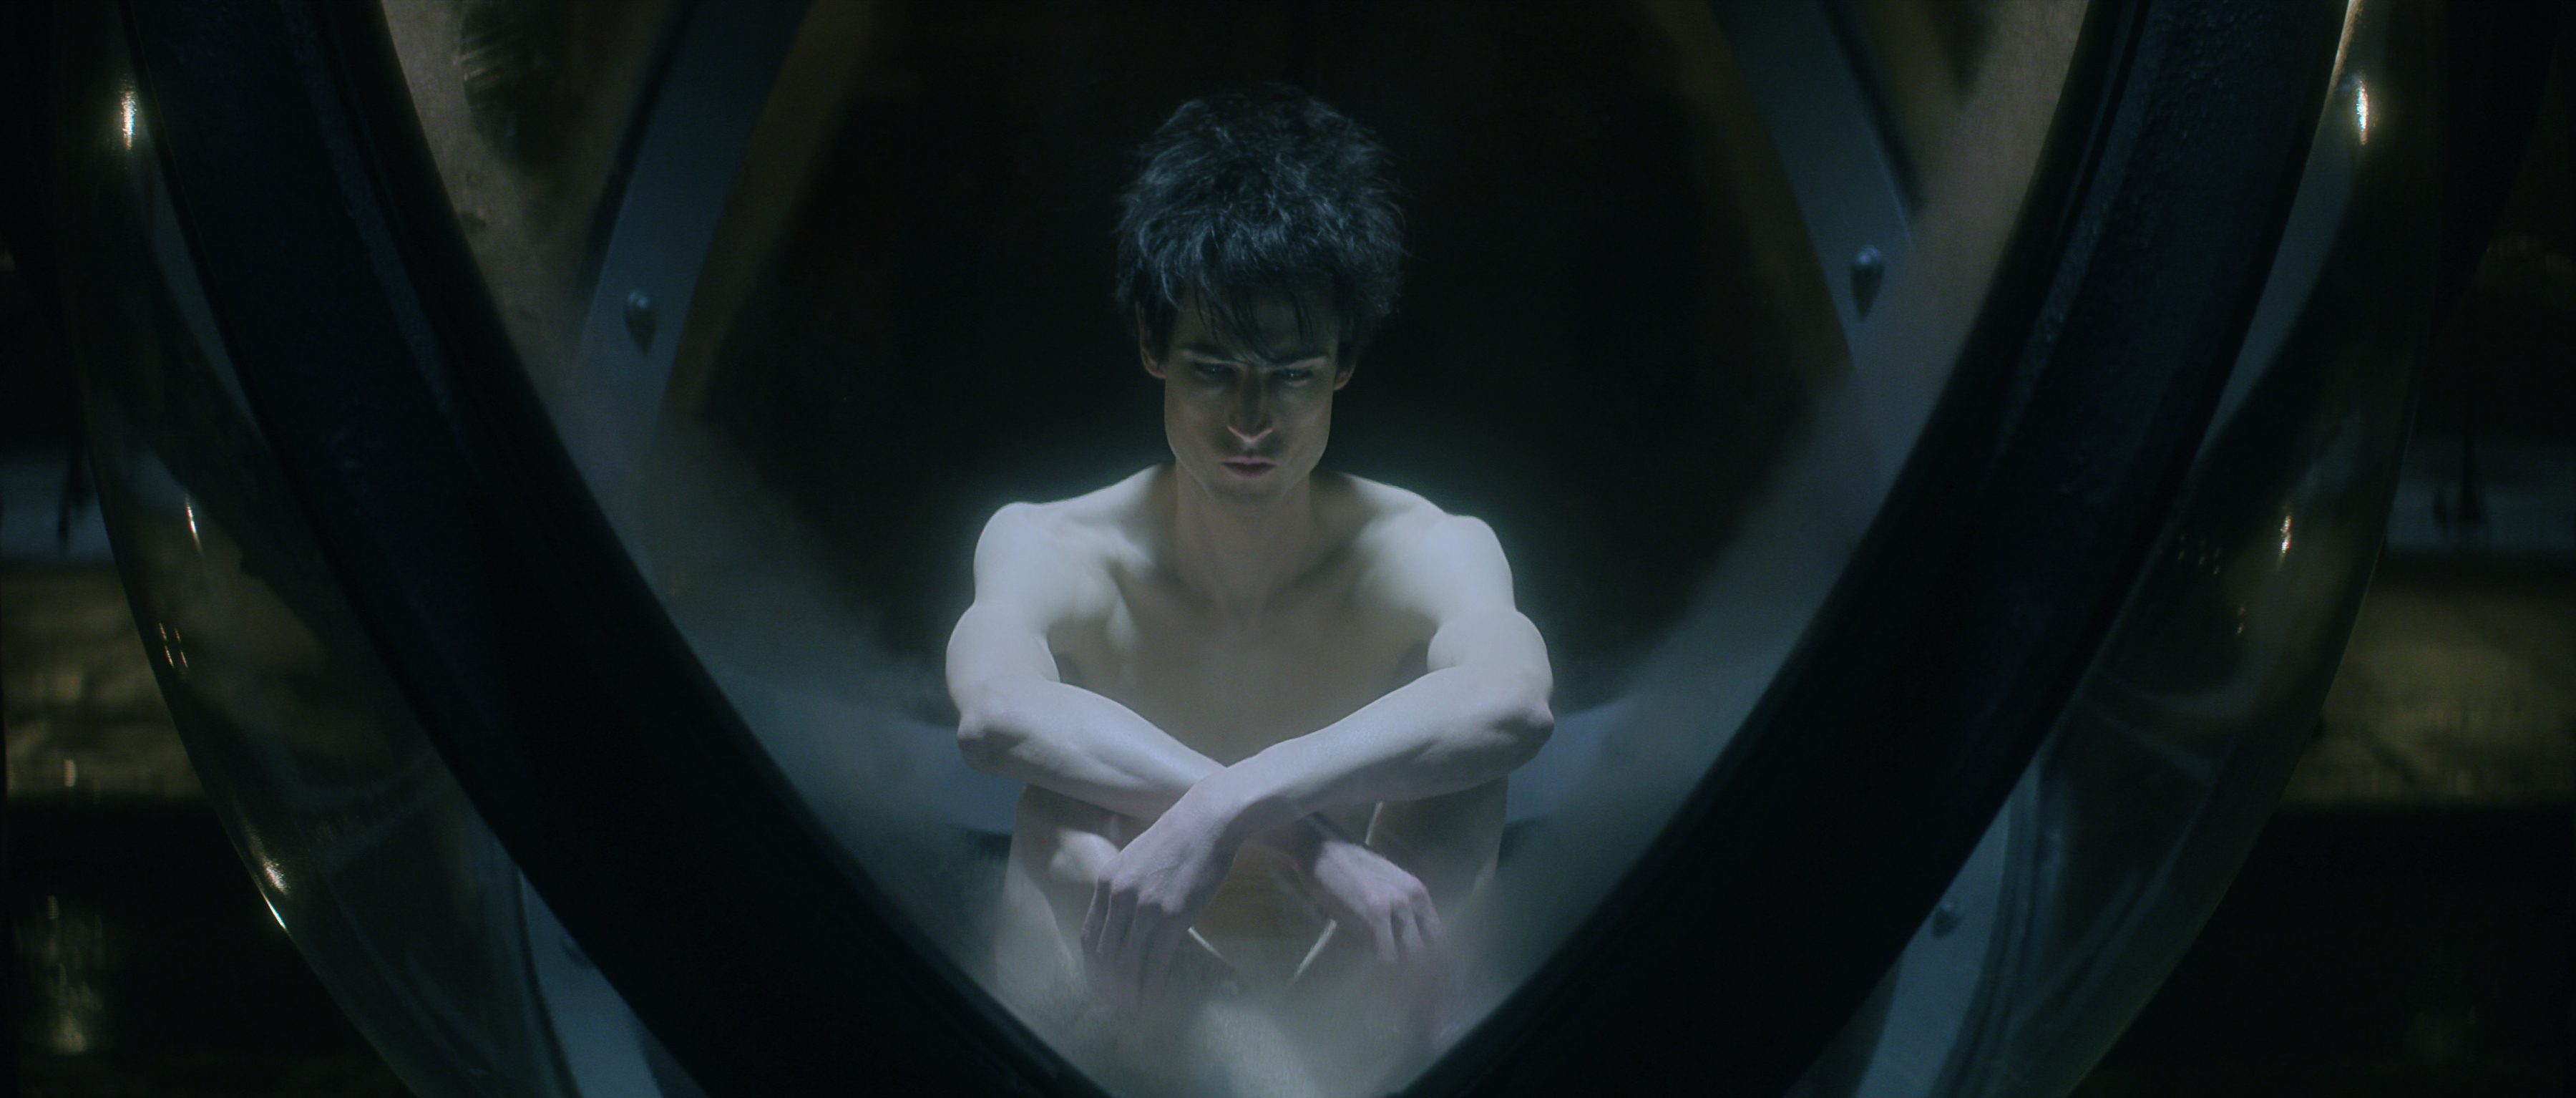 Tom Sturridge as Dream of the Endless in The Sandman, sat in the glass cage that is his prison